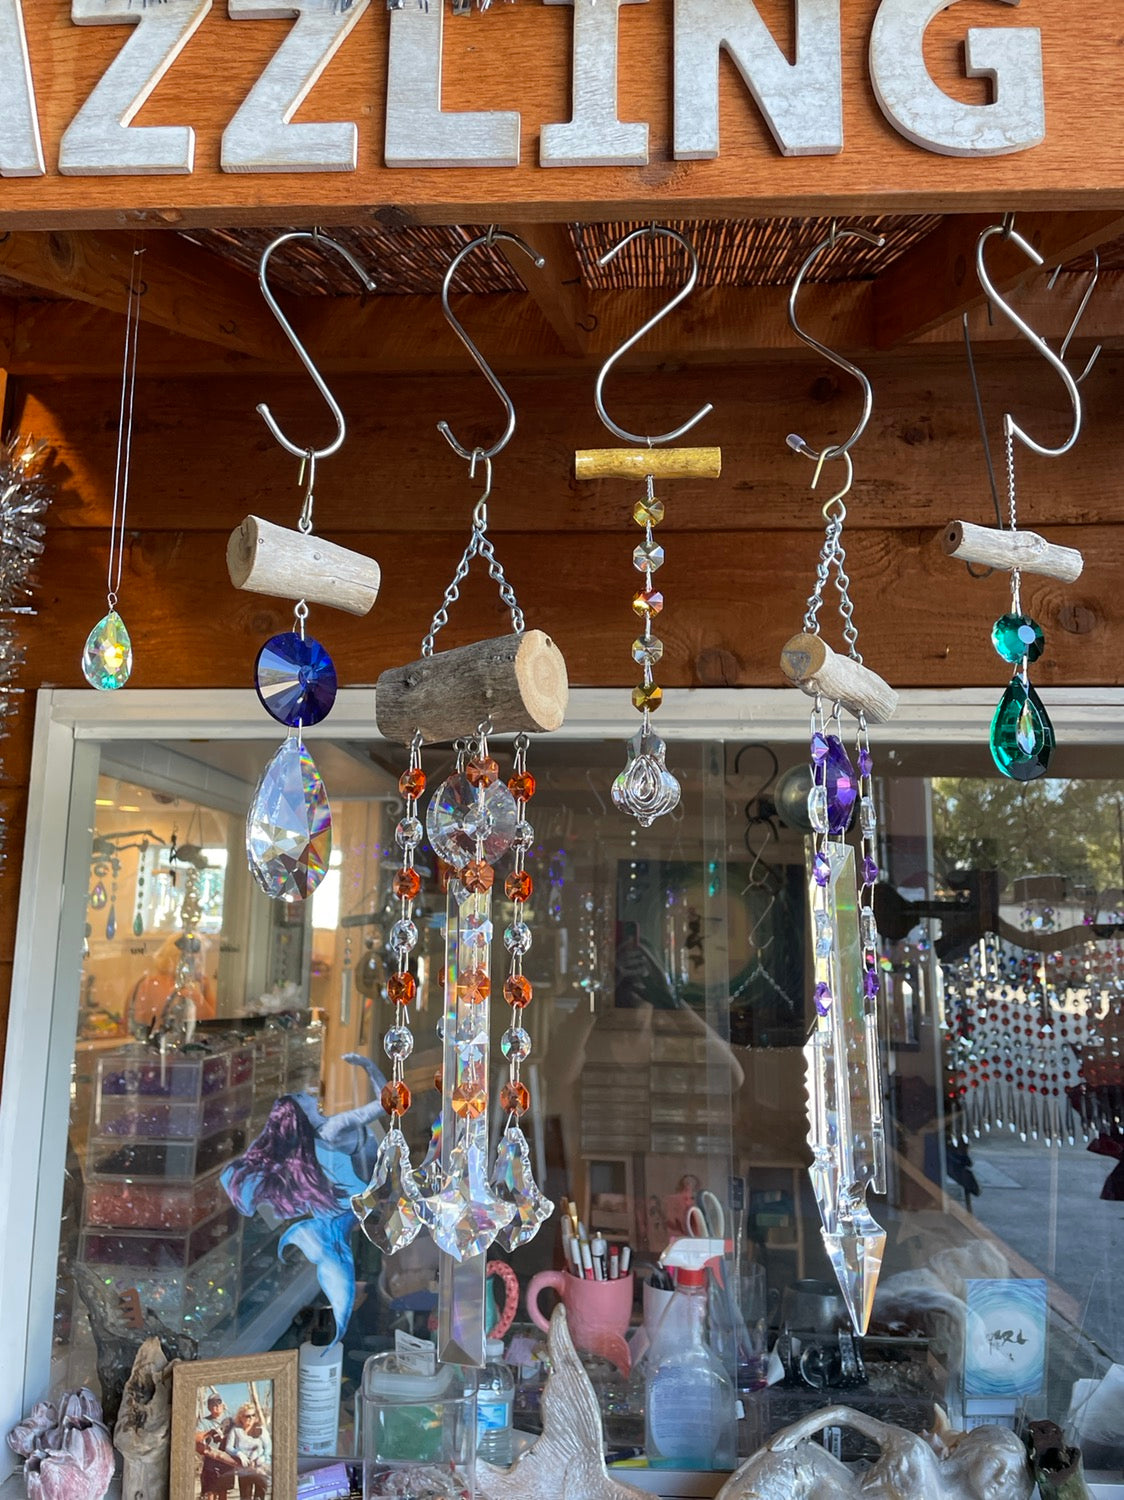 driftwood chandelier crystals sampler wind chime and sun-catchers